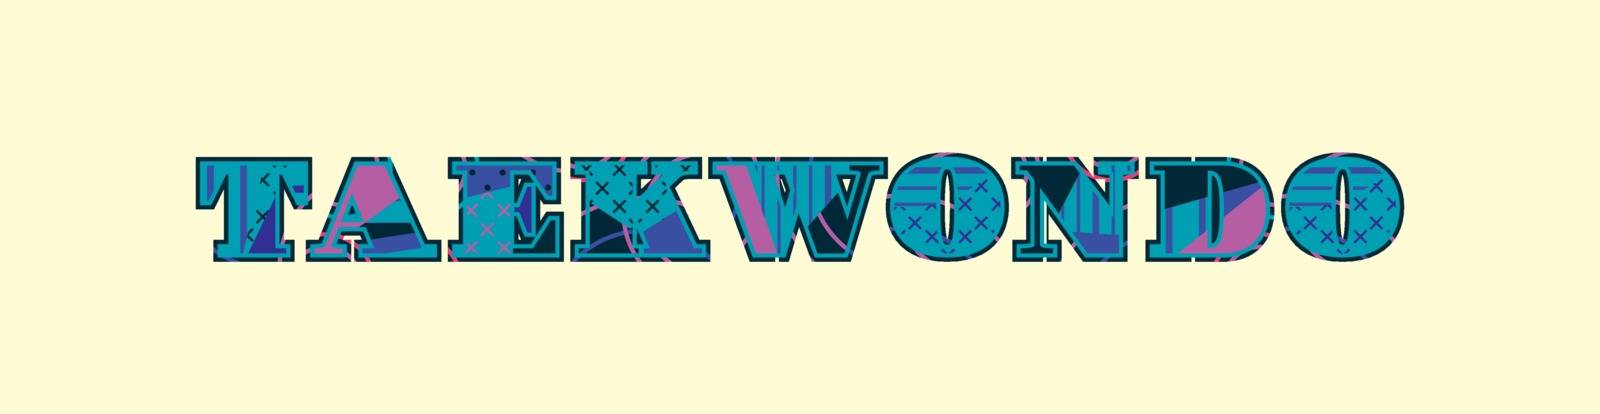 The word TAEKWONDO concept written in colorful abstract typography. Vector EPS 10 available.